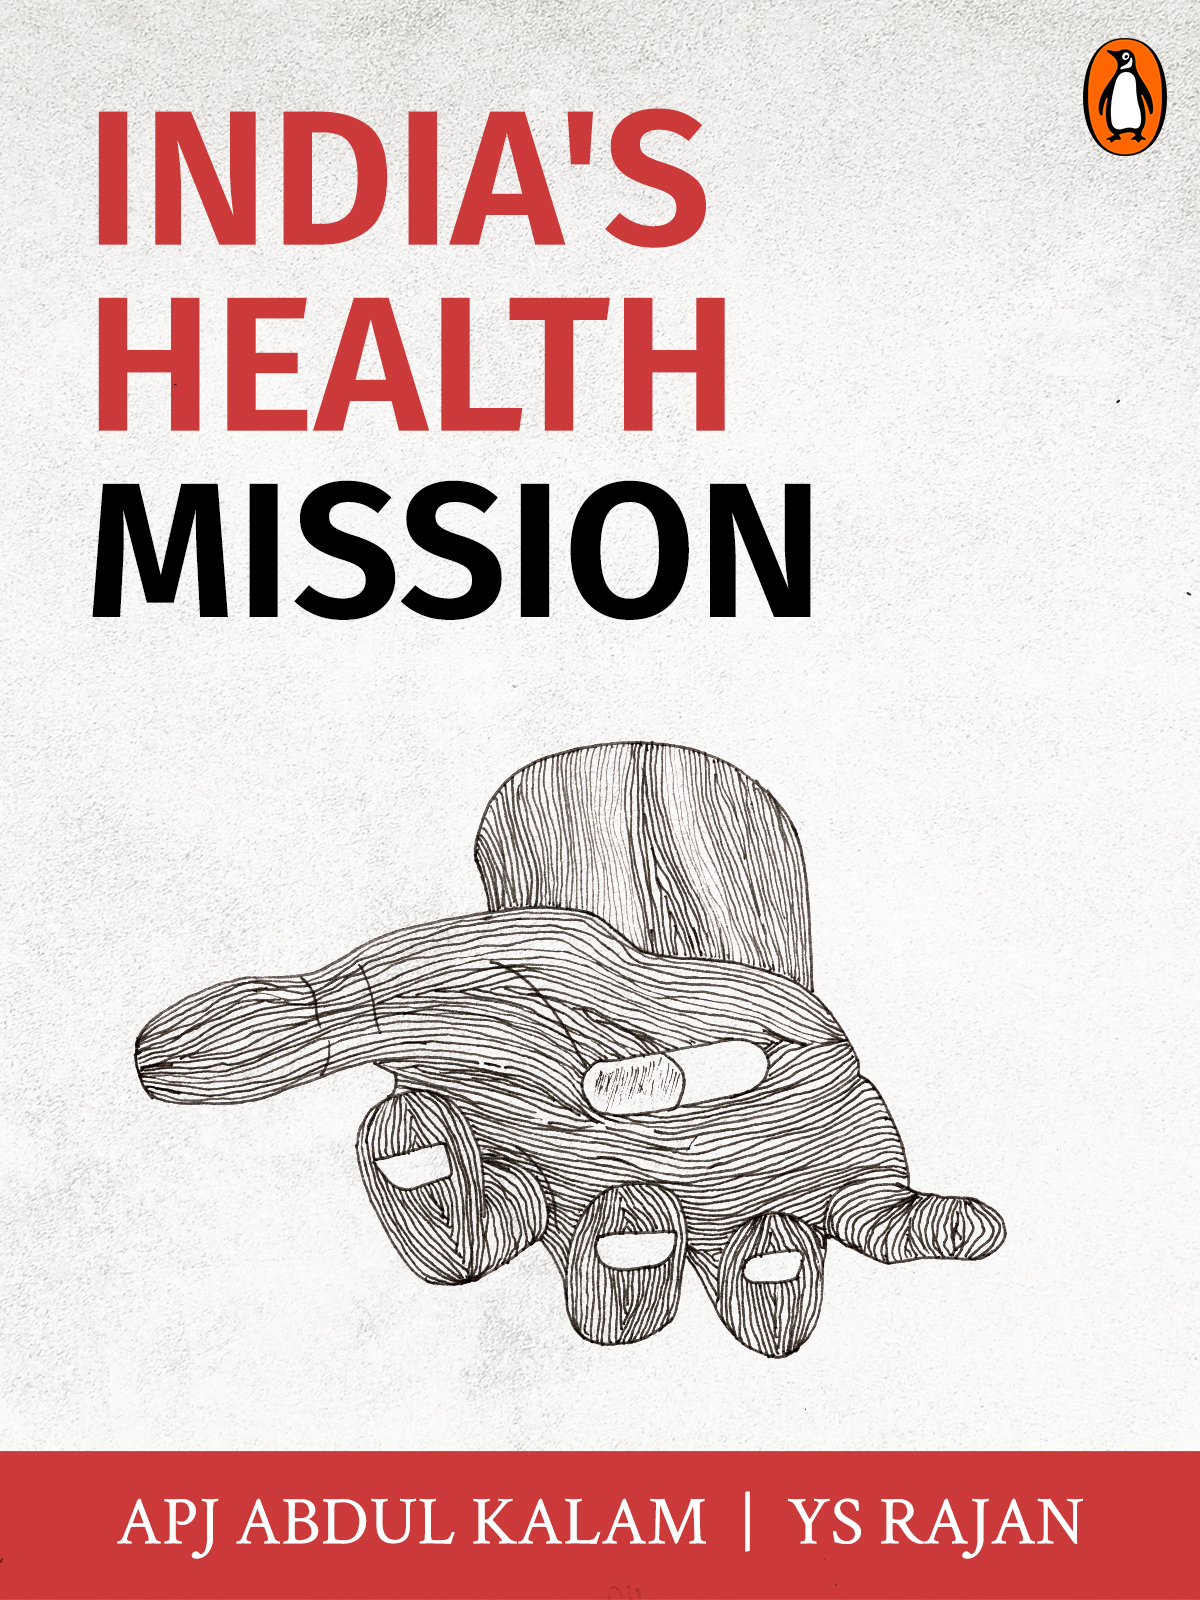 assignment on national health mission